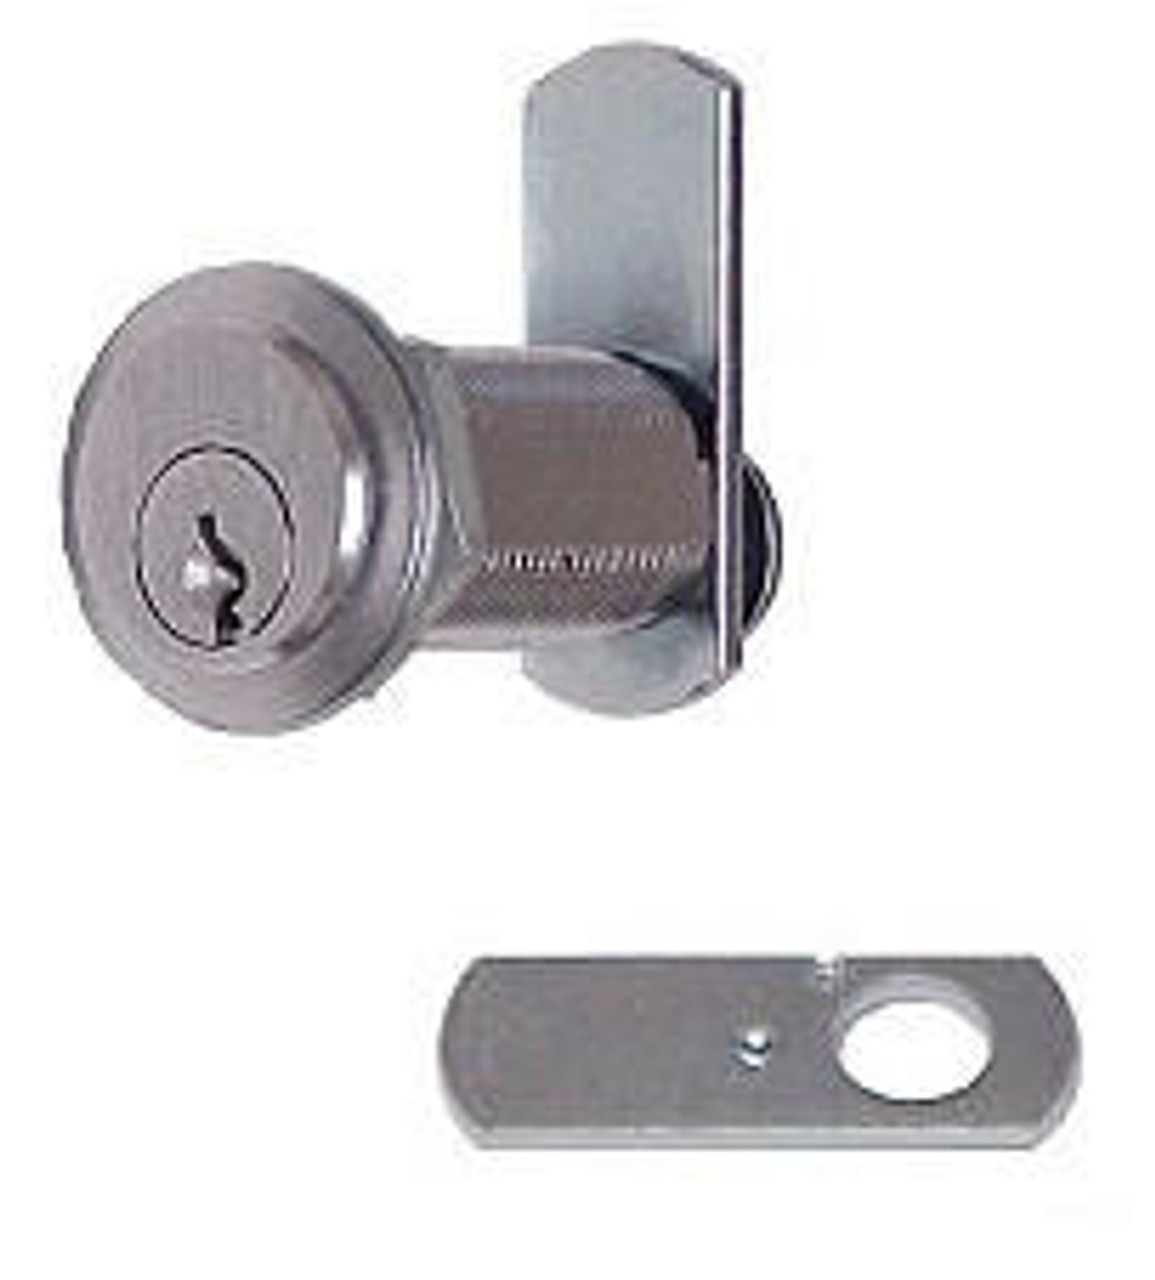 Compx Security Products Compx C8109 Cylinder Pin Tumbler Cam lock 1-3/4" Cylinder Length for 1-1/2" Maximum Material Thickness 